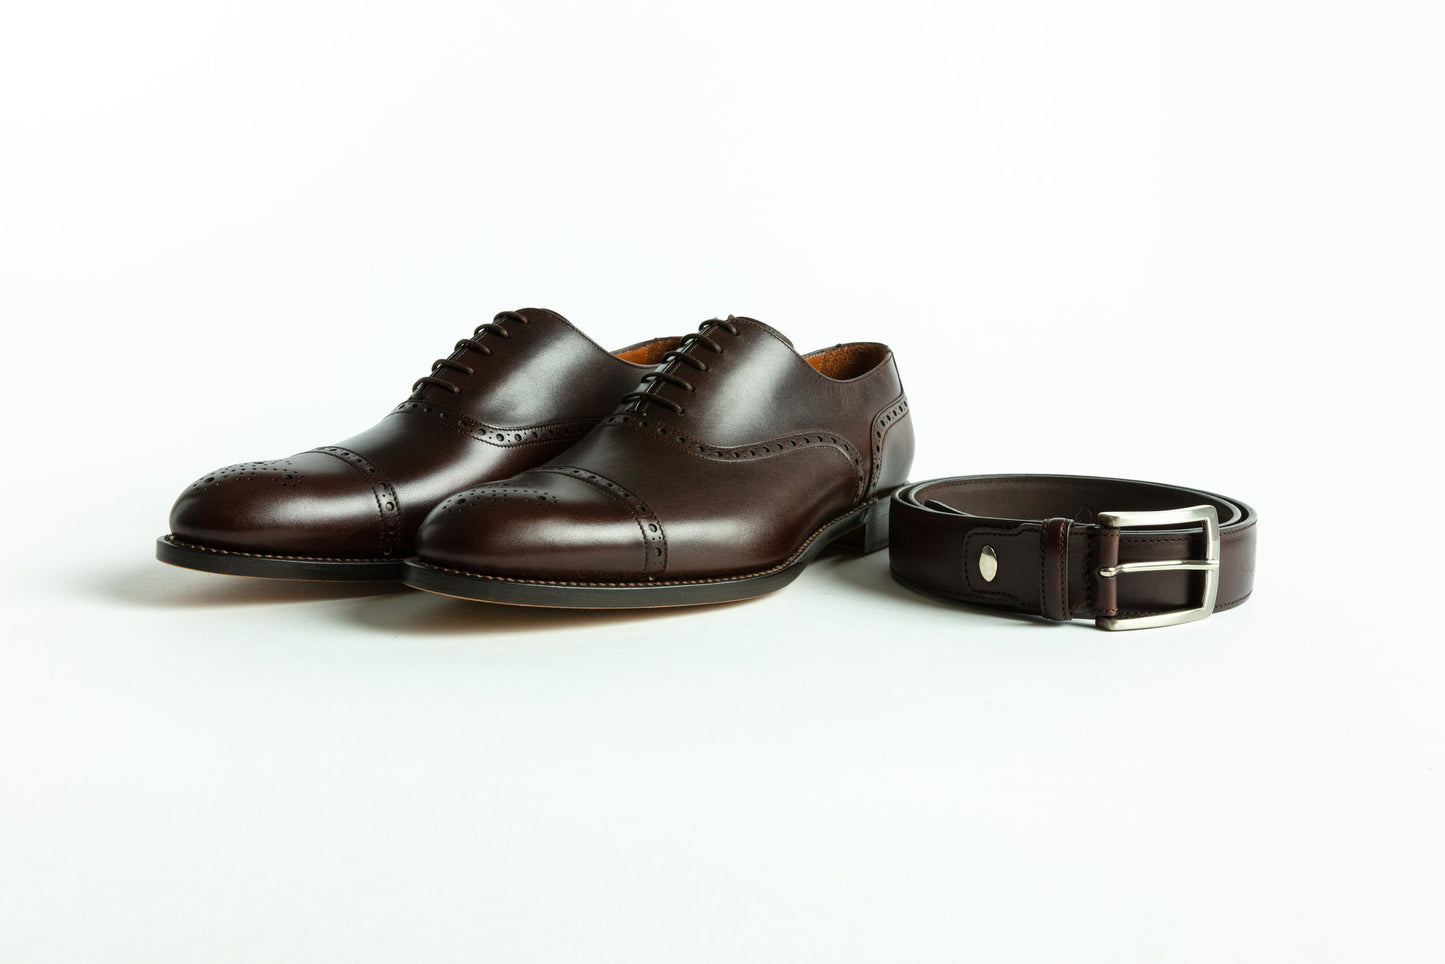 The Spencer in Mahogany with Matching Belt